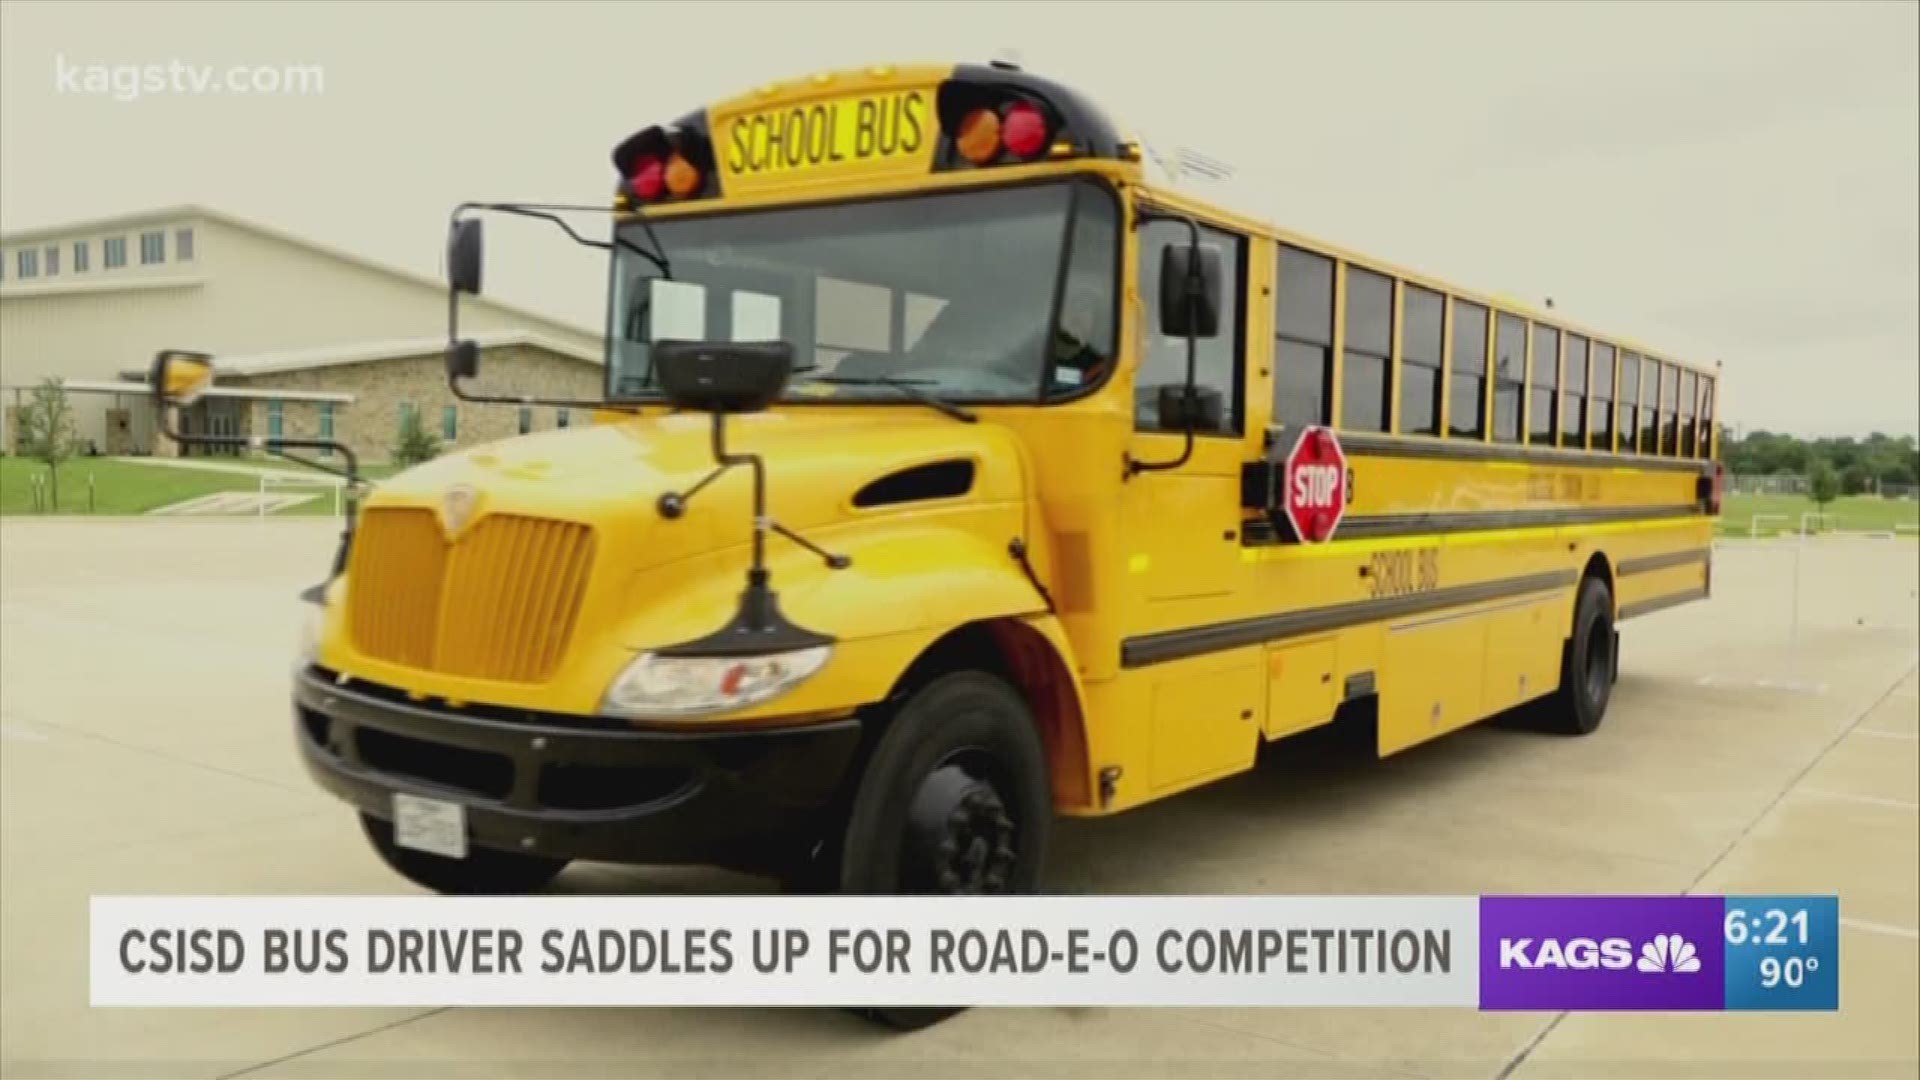 Local bus driver Josh Shelton saddles up to compete in the State School Bus Road-E-O.